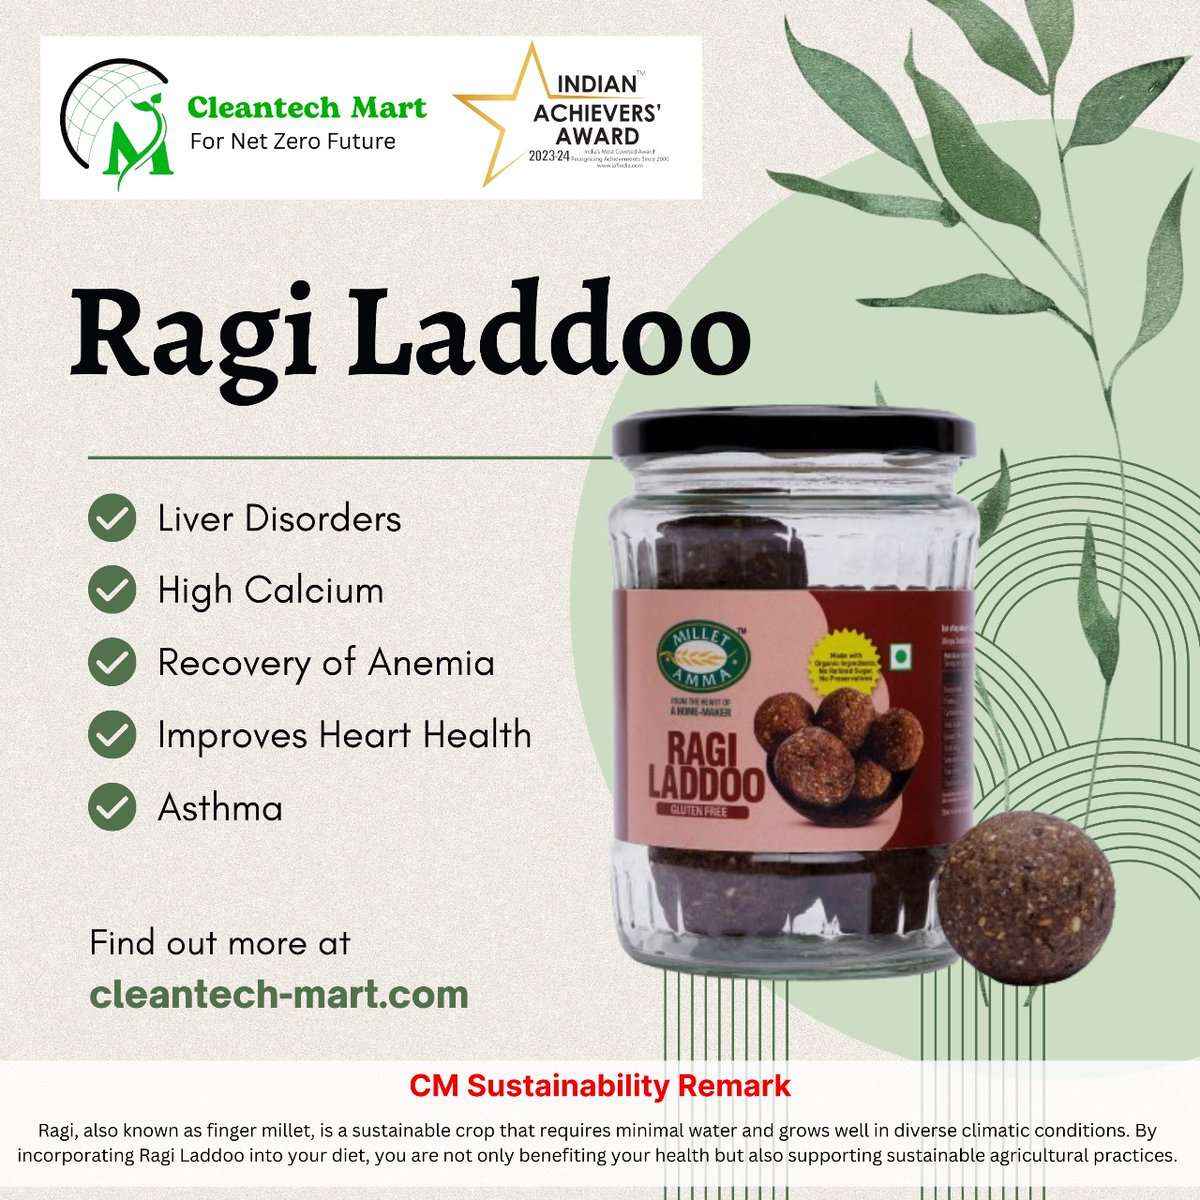 Indulge in the goodness of Ragi Laddoo, a nutritious treat that offers a myriad of health benefits. 

#RagiLaddoo #HealthySnacking #Sustainability #cleantechmart